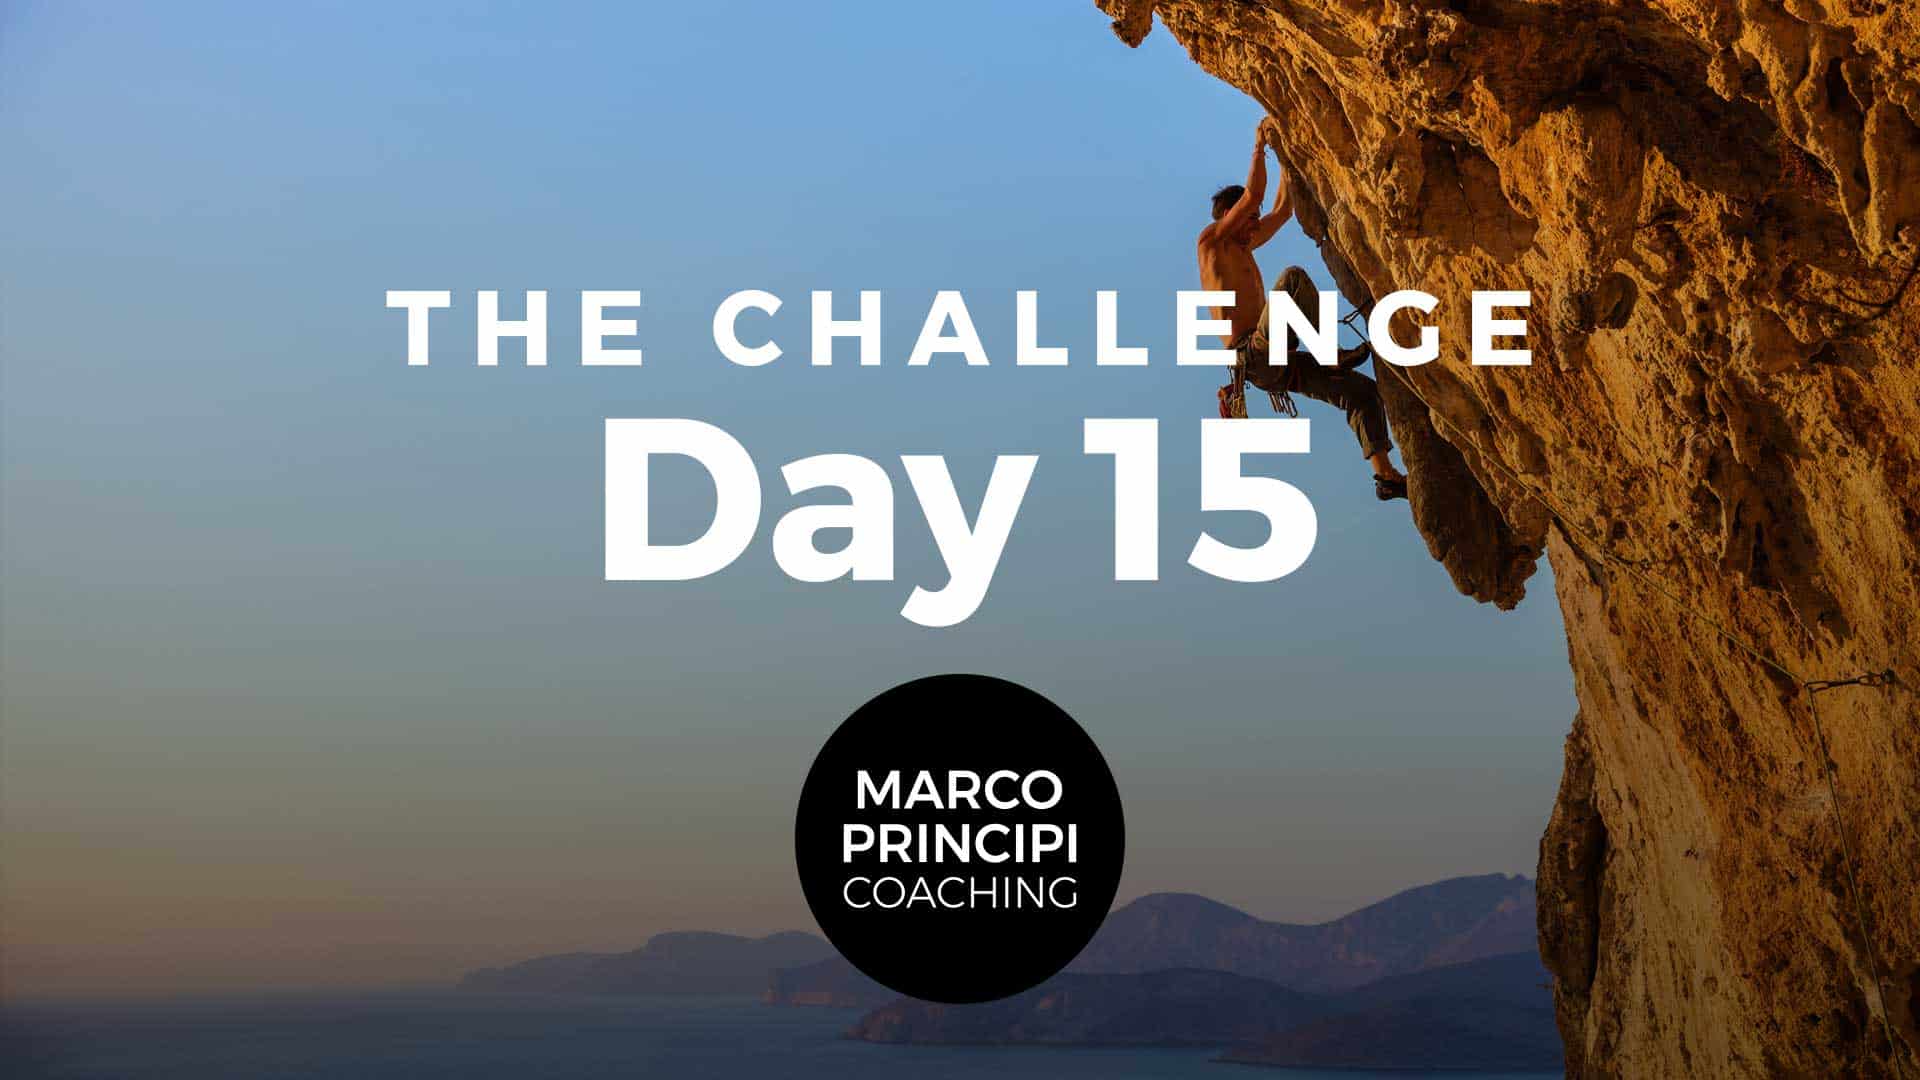 Marco Principi YT Cover The Challenge Day 015